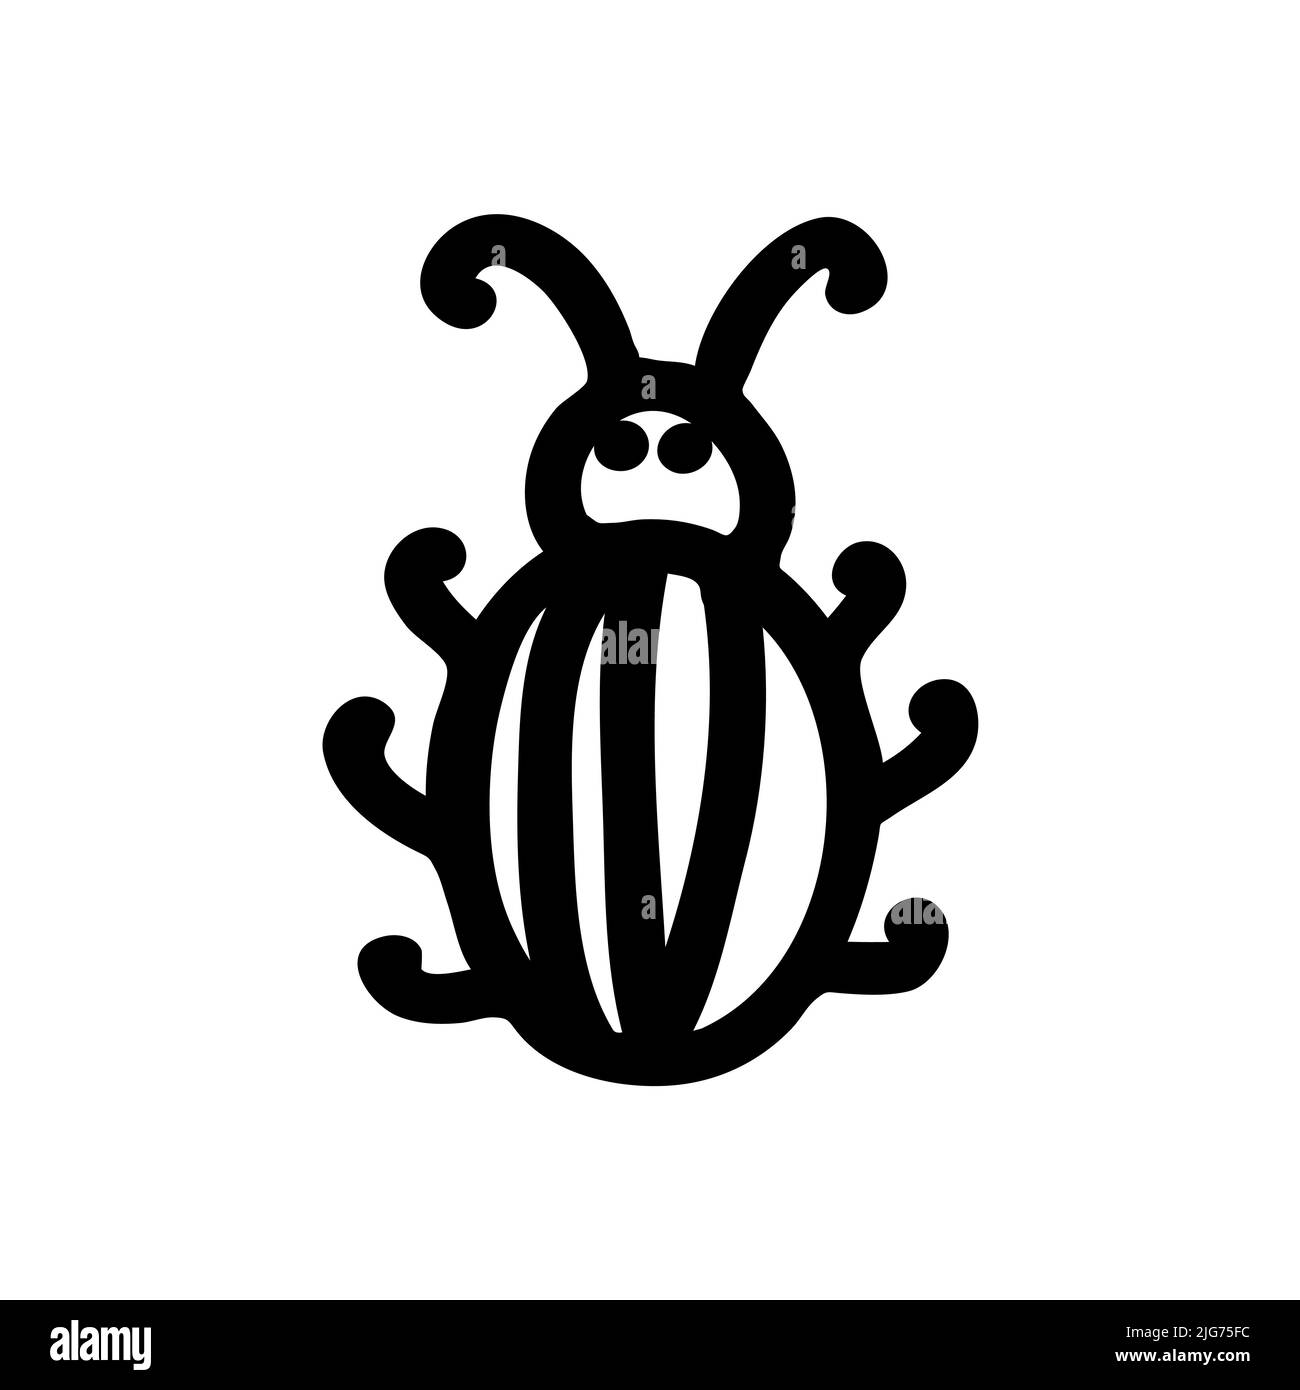 Beetle, insect, ladybug flat line art illustration in doodle style. Cute ladybug. Insect icon Stock Vector